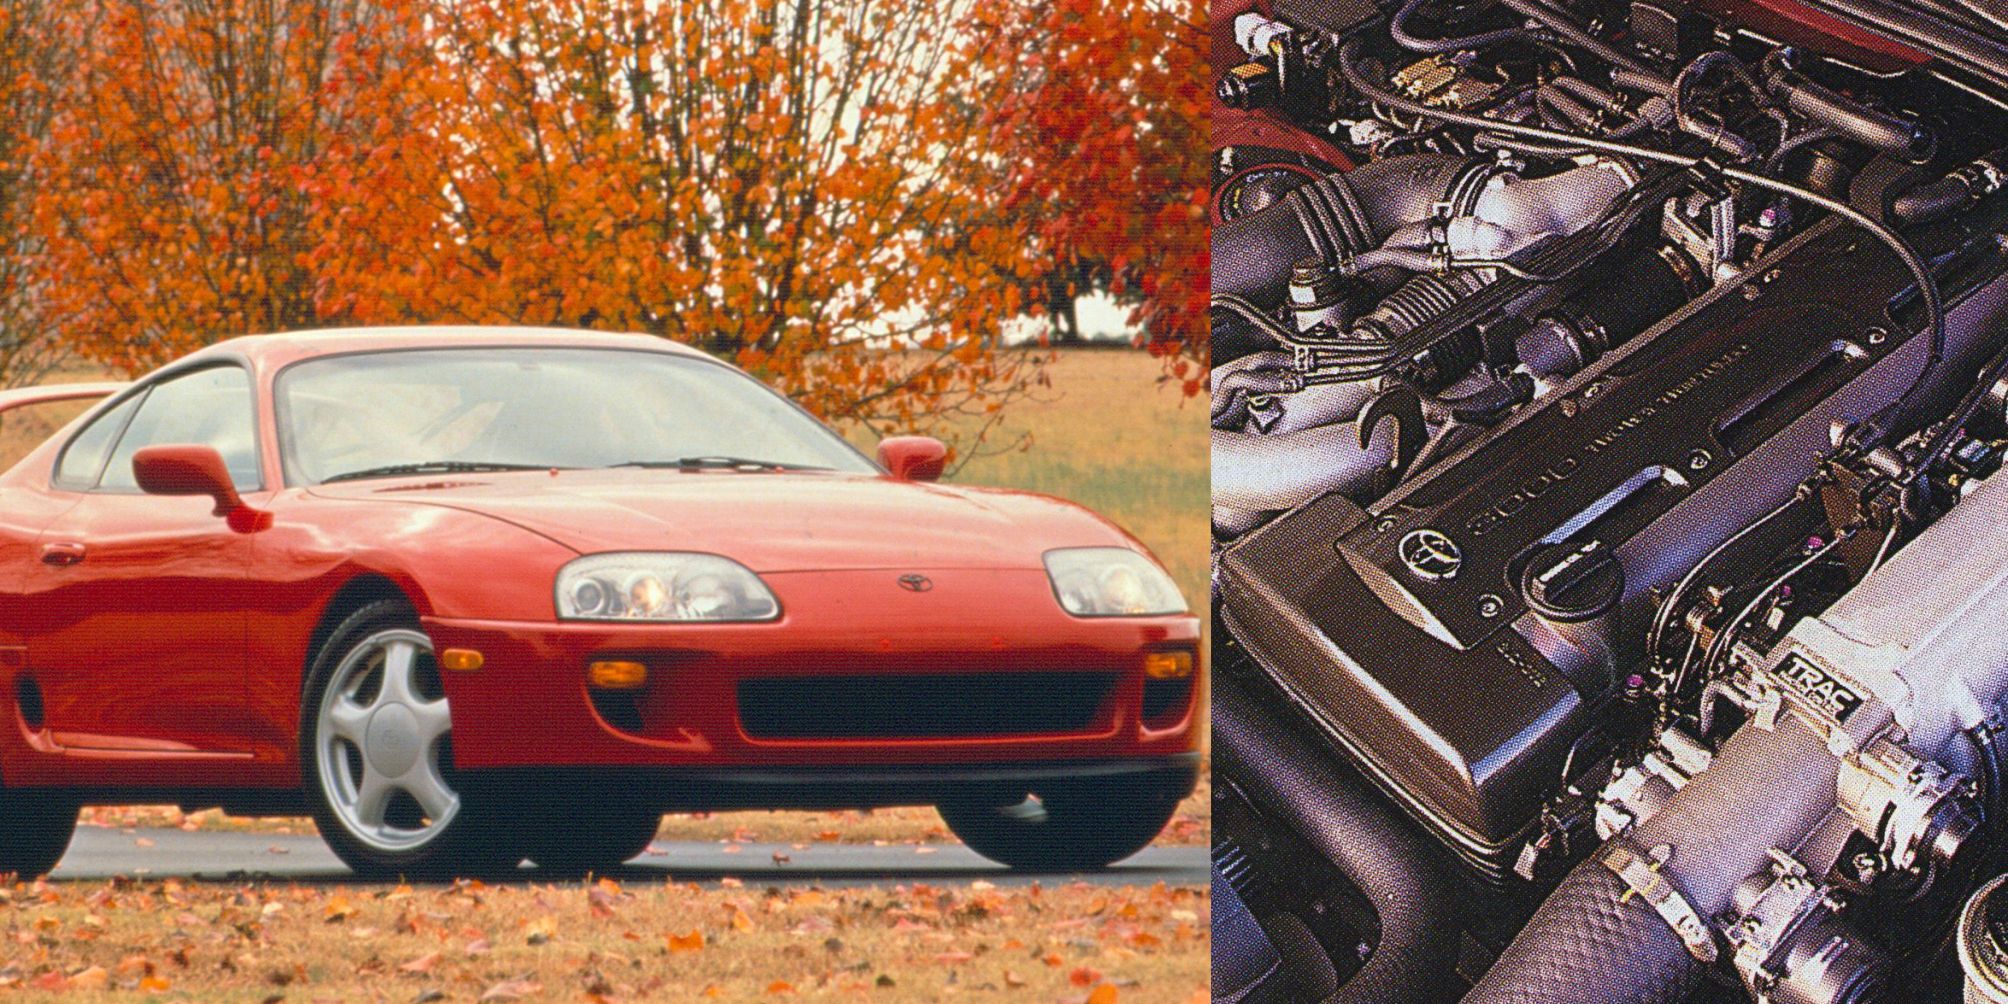 The Legendary Toyota Supra - Why Is it So Popular?